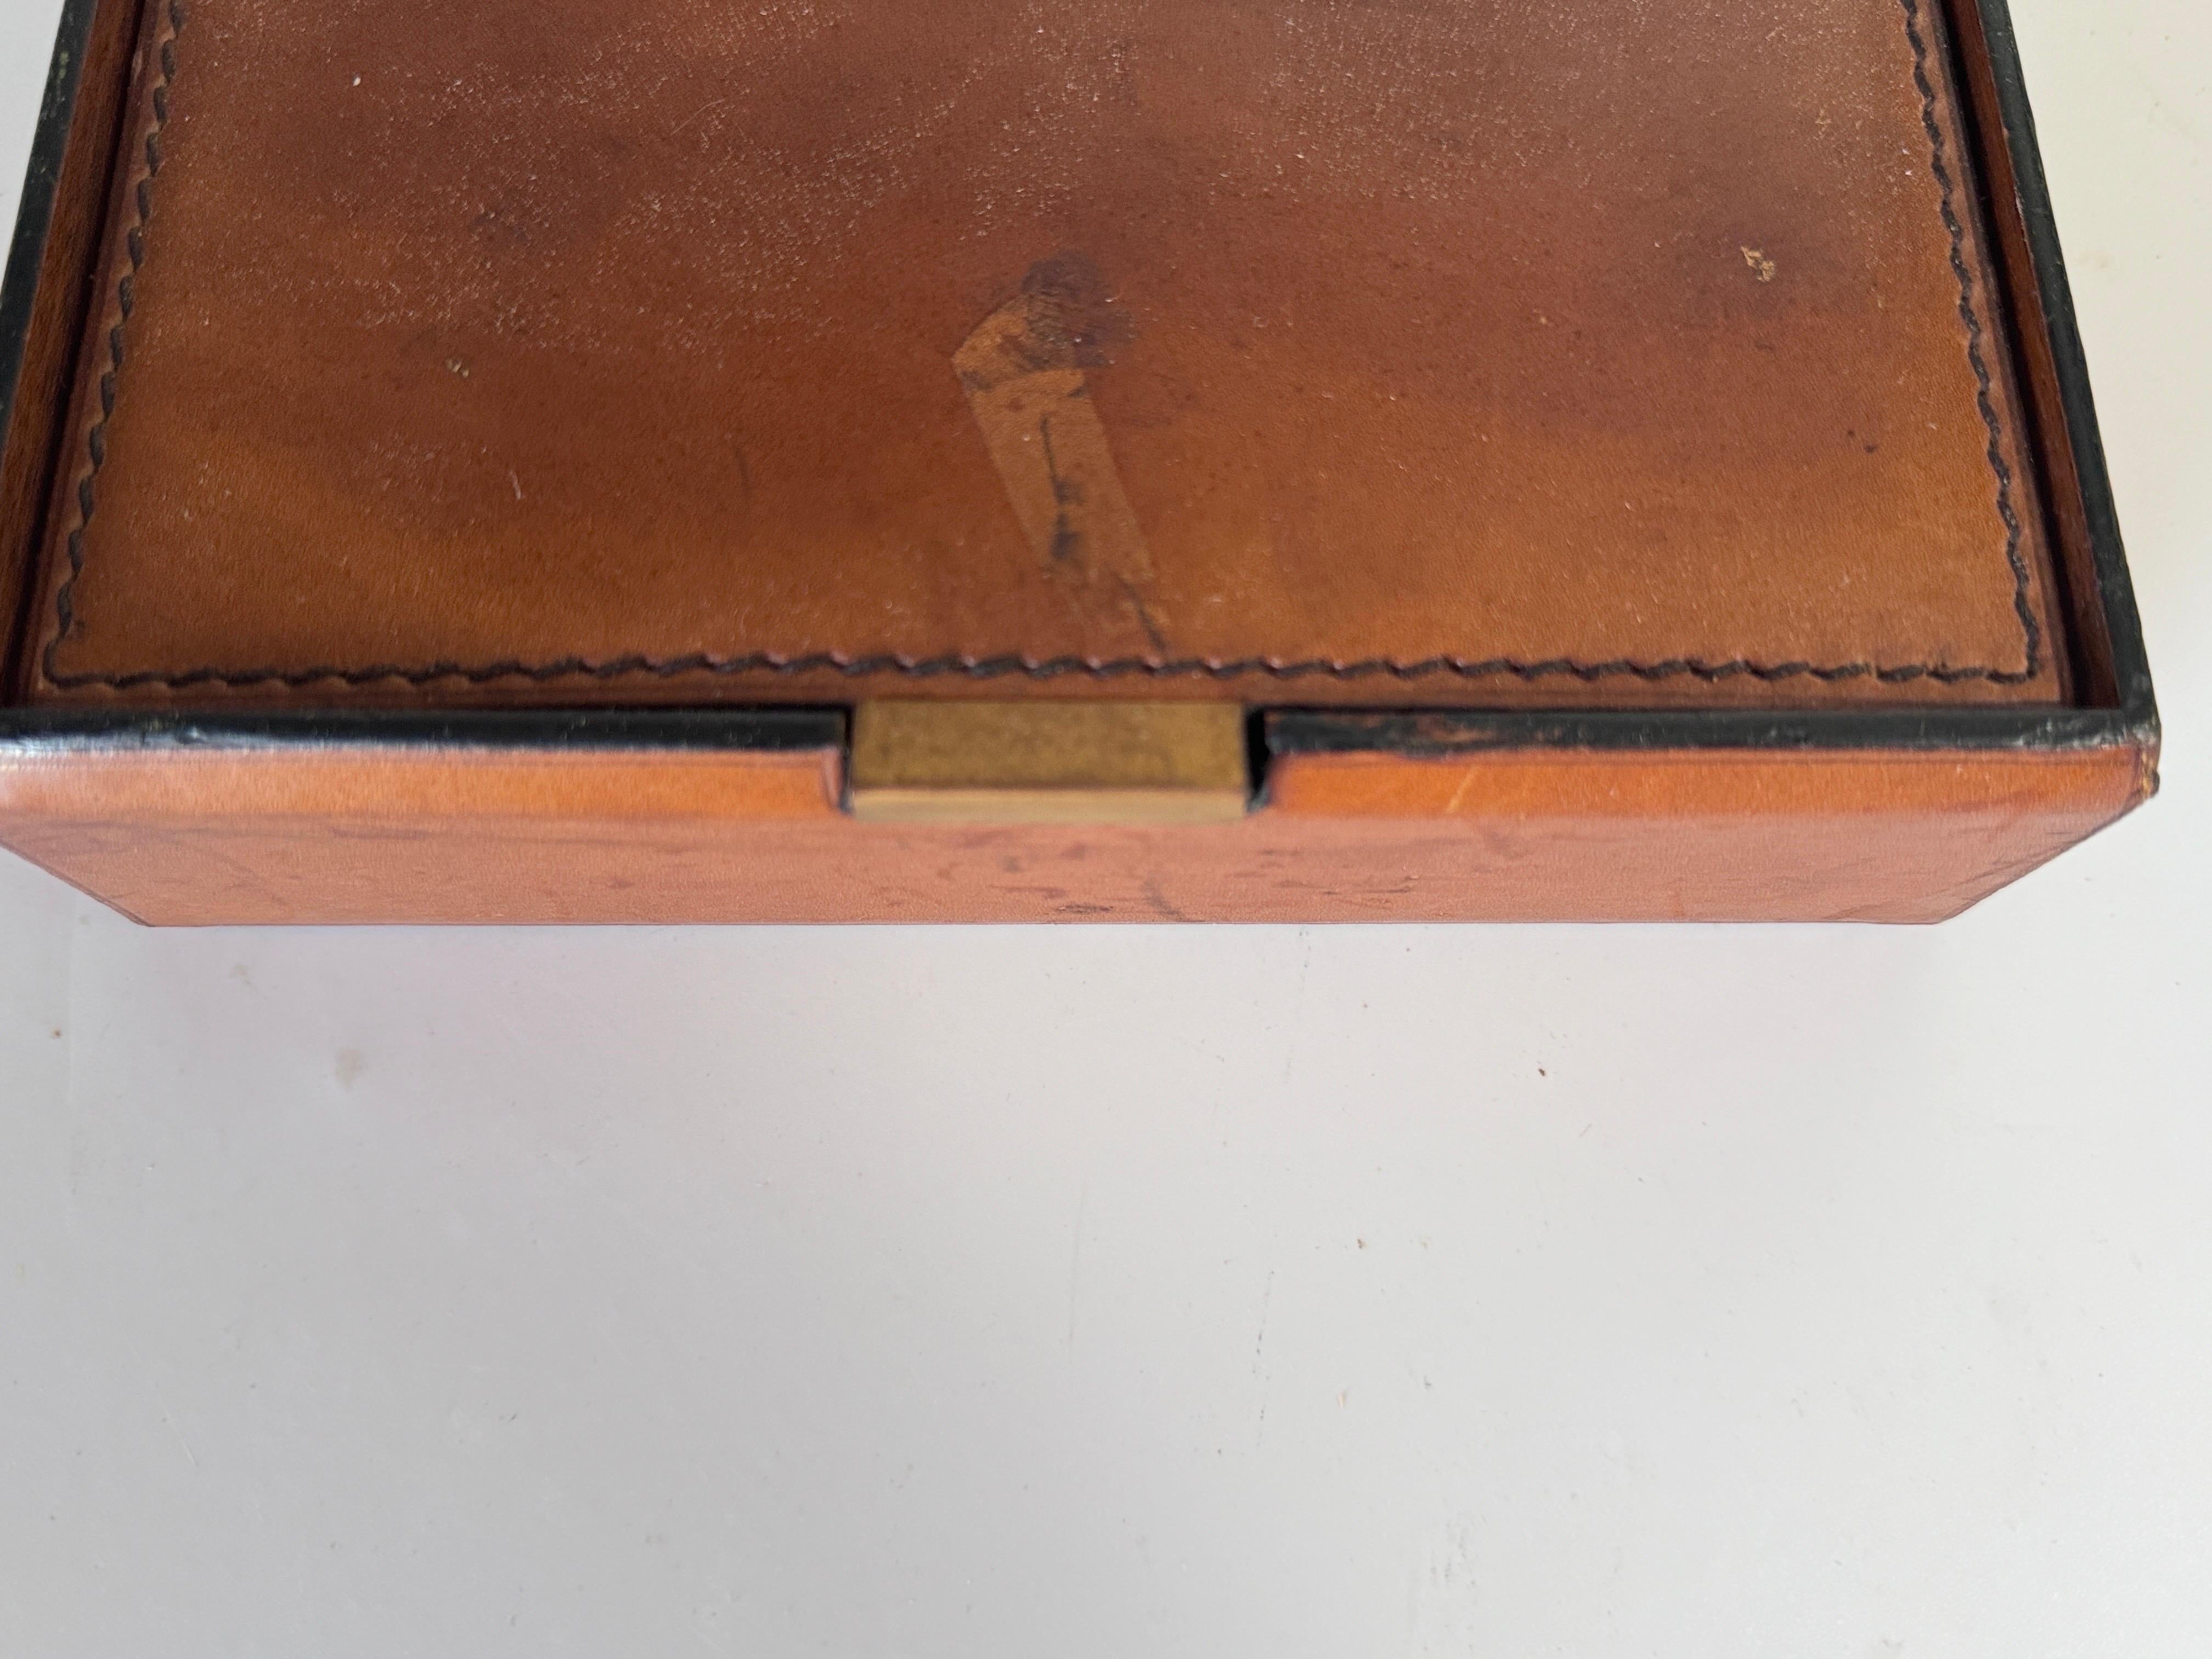 Leather Covered Tobacco Box Wood Brown Jacques Adnet Style France 1940 by Lancel For Sale 4